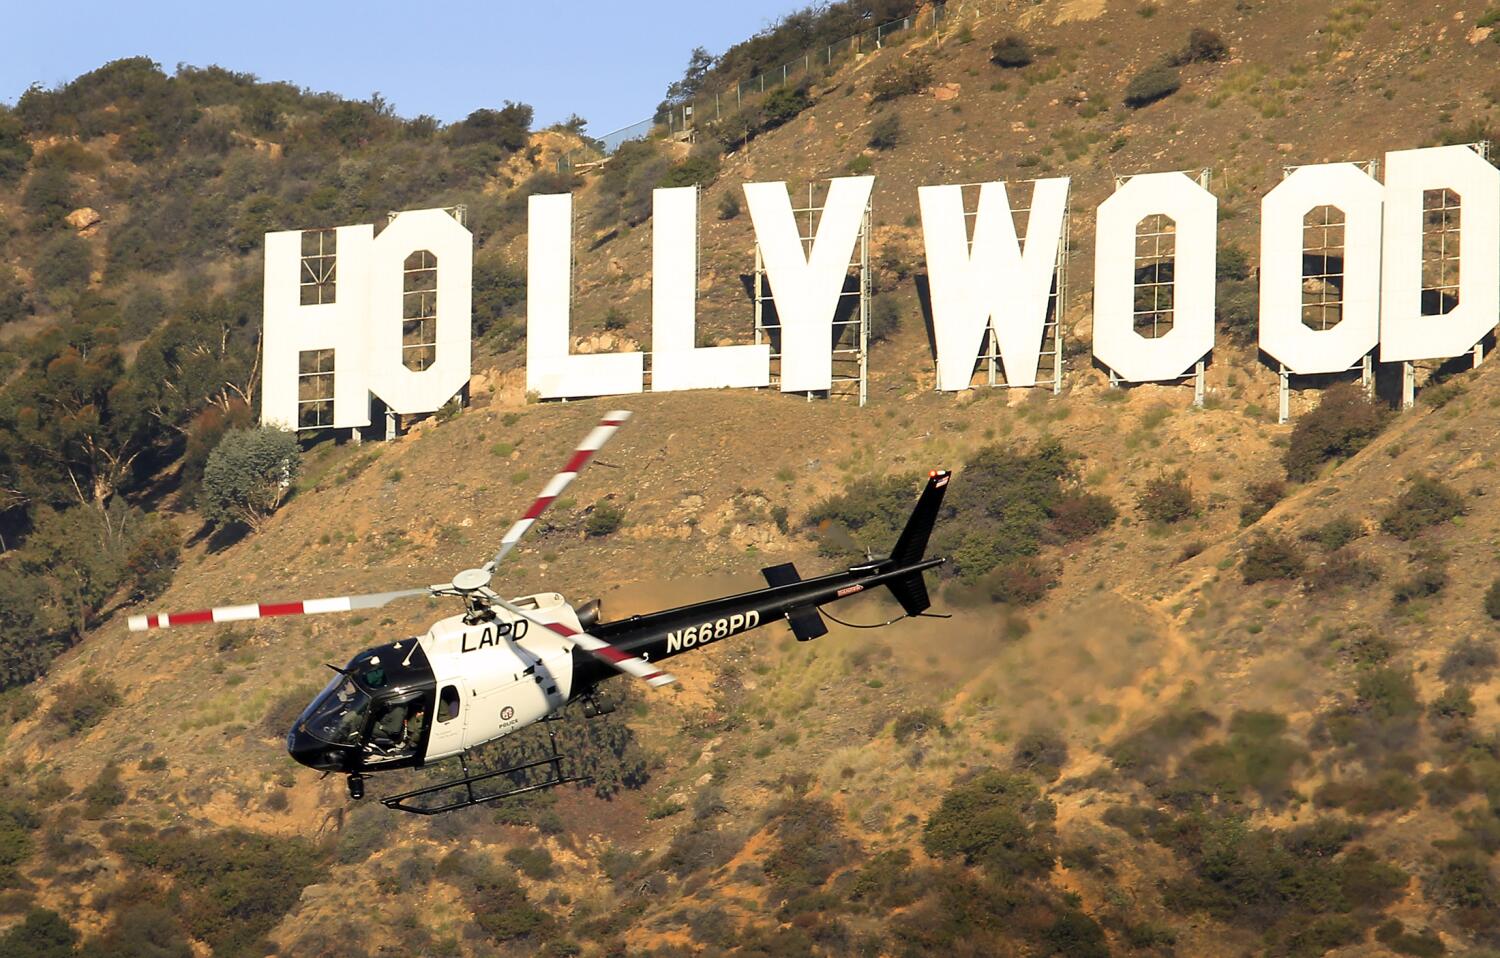 The LAPD says it needs helicopters. An audit found most flights aren't for 'high priority' crimes